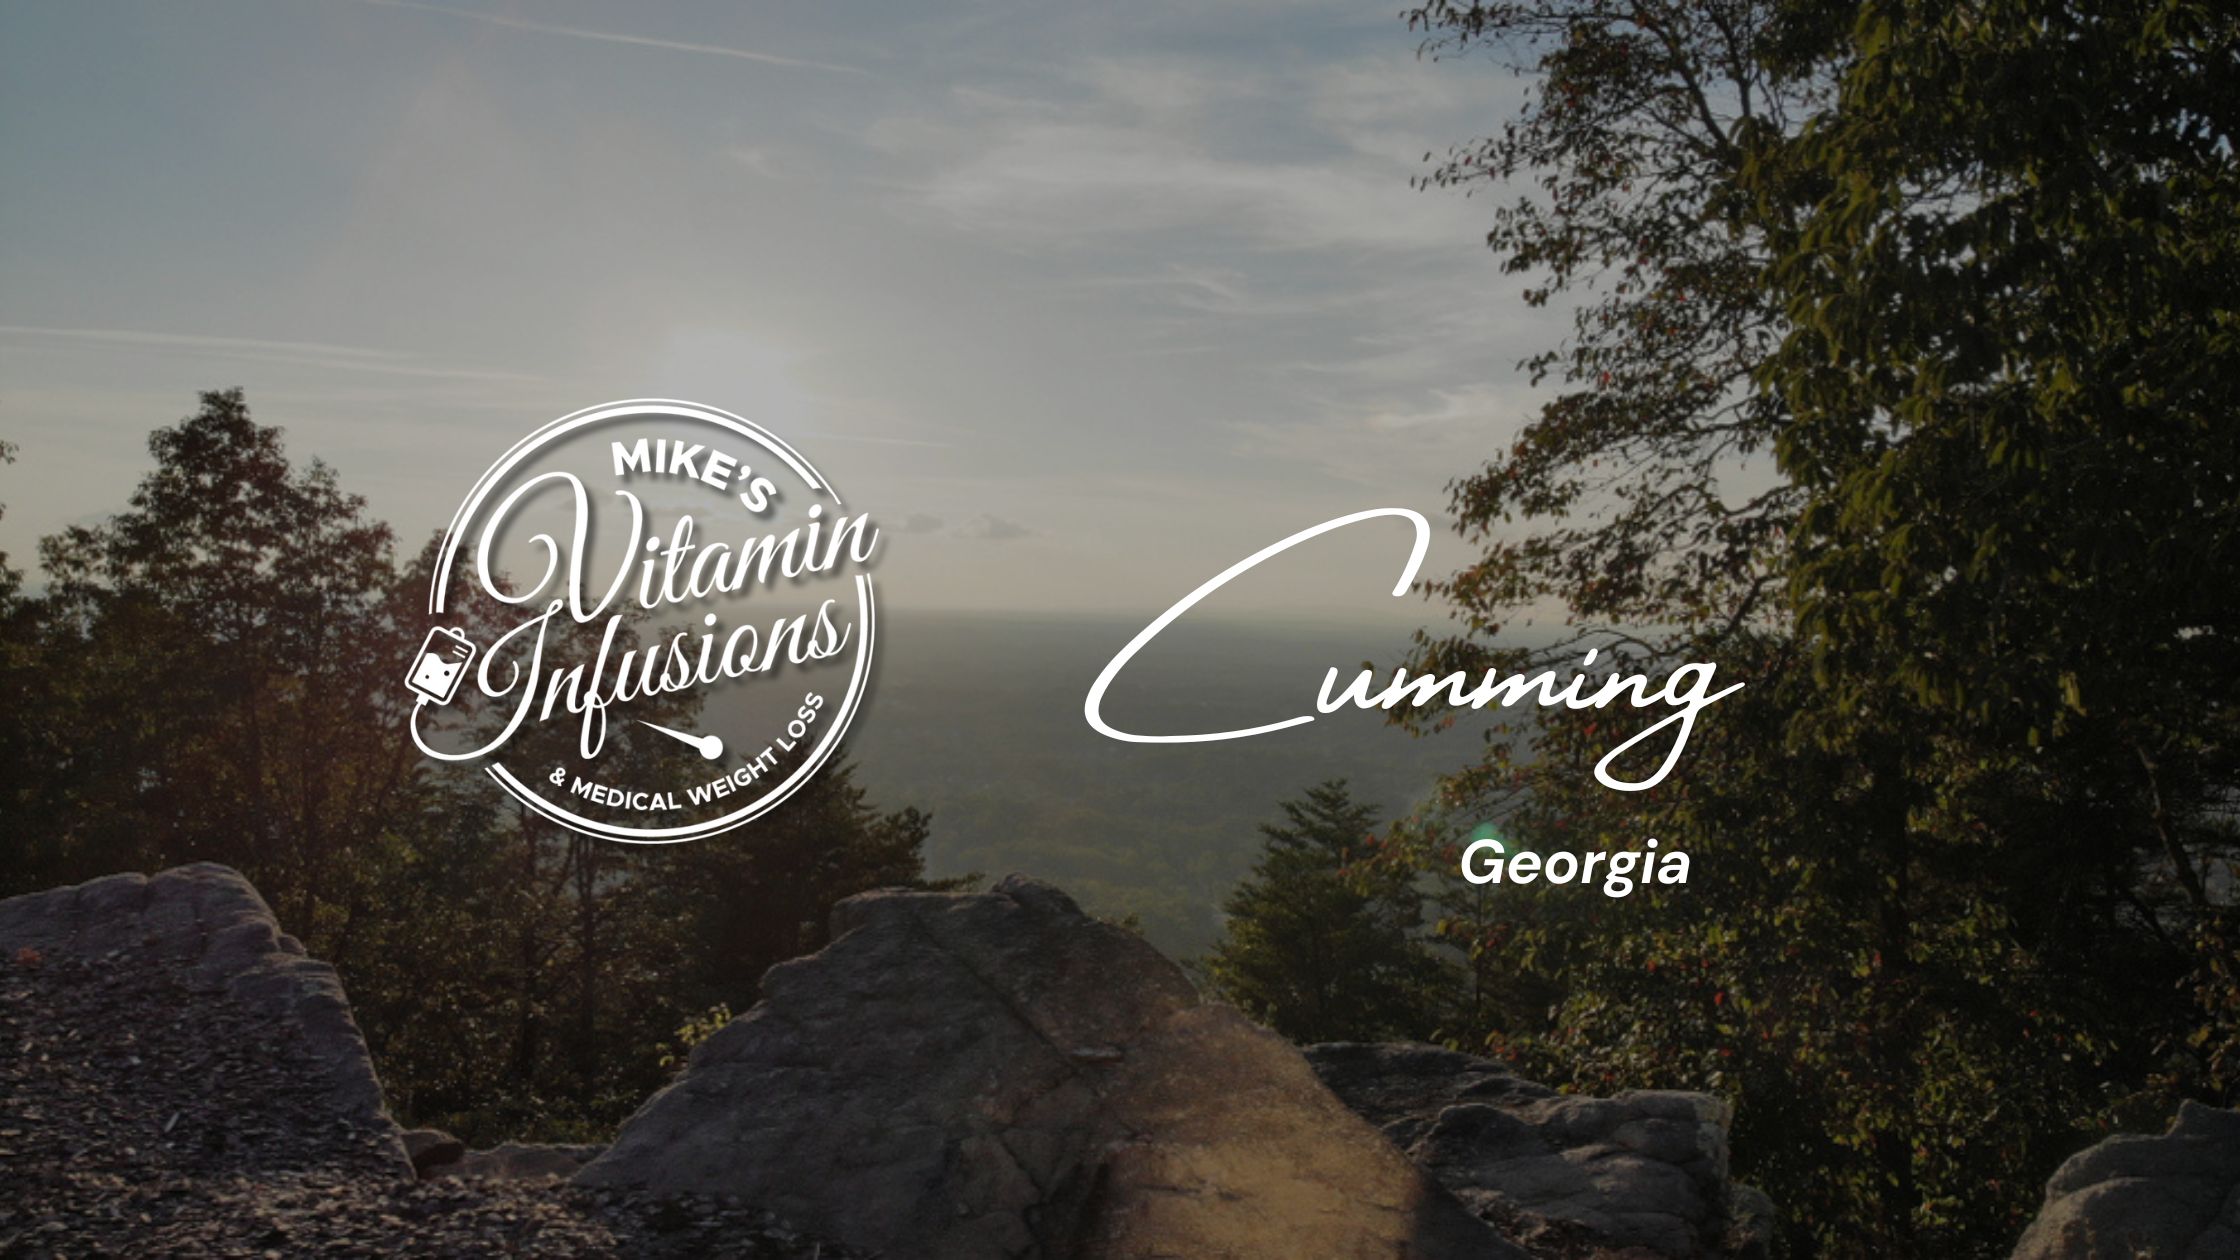 Image overlooking Cumming Georgia with the mike's vitamin infusions logo